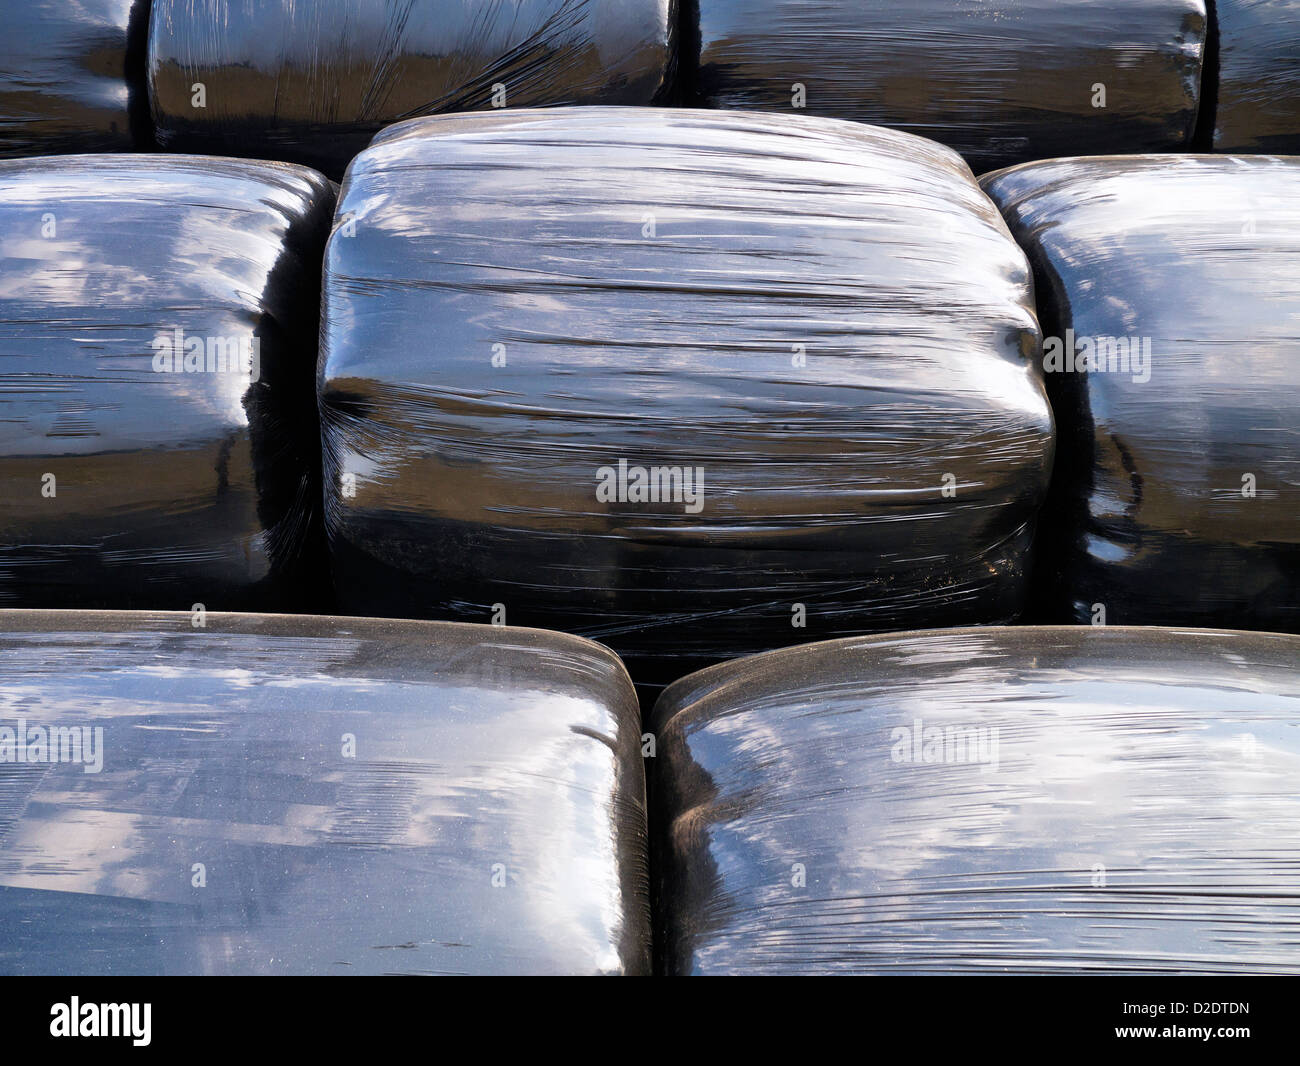 Bales of Straw Wrapped in Black Plastic Bags Stock Photo